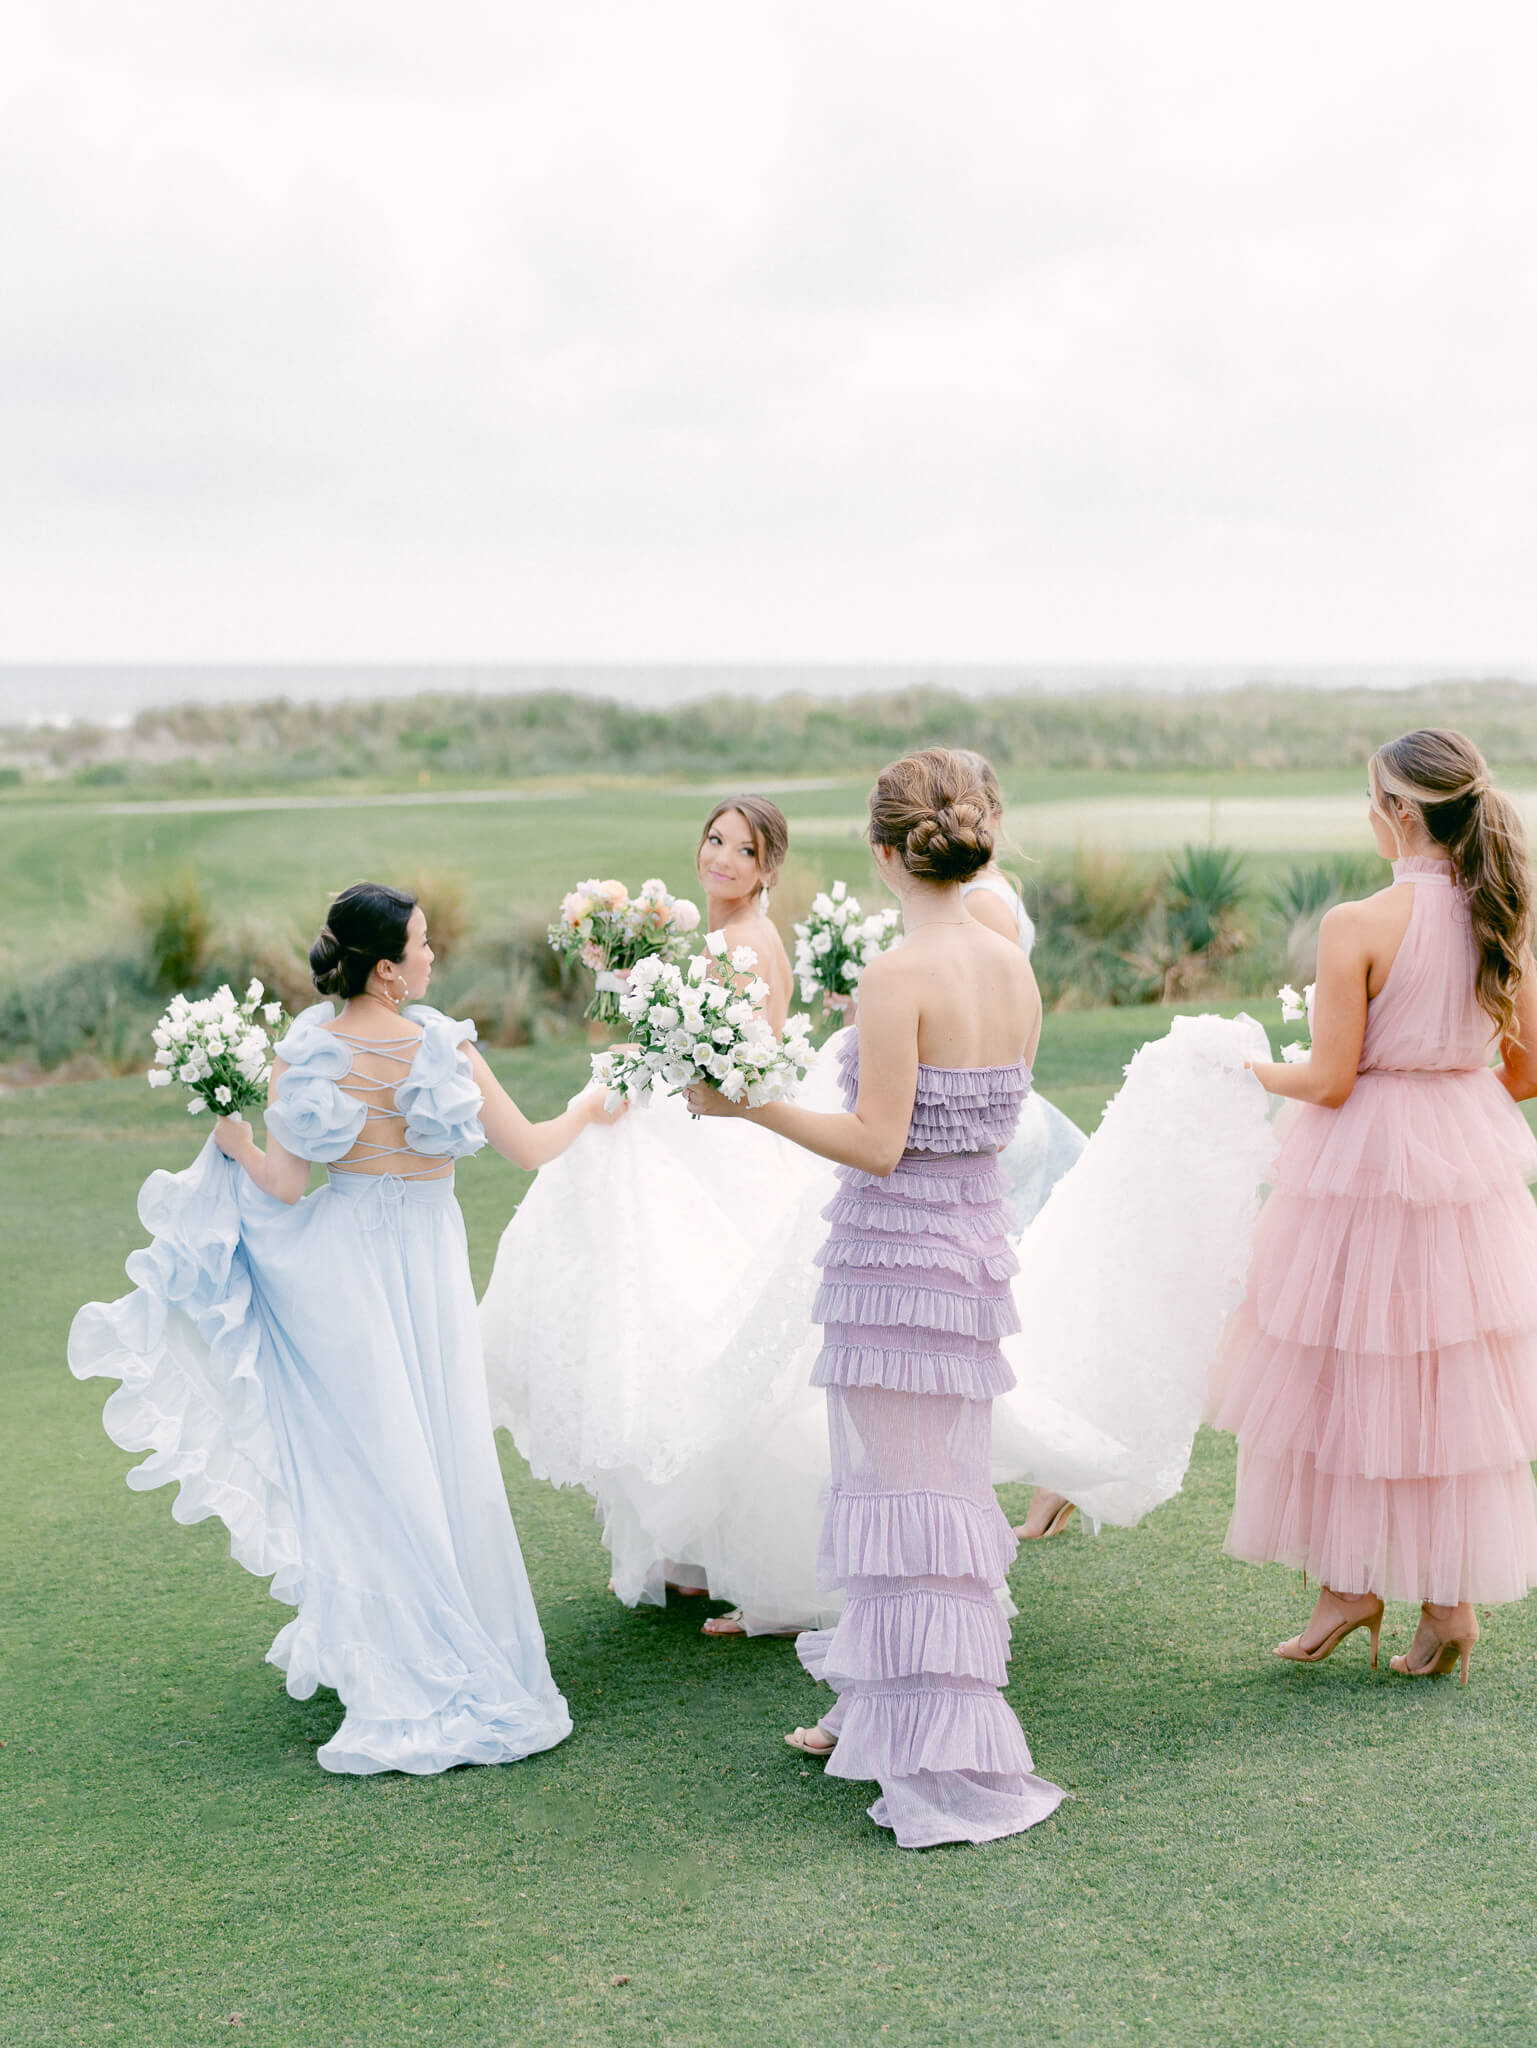 Three bridesmaids dressed in mismatched pastel blue, lilac and blush dresses walking across the golf course and helping the bride carry her gown.